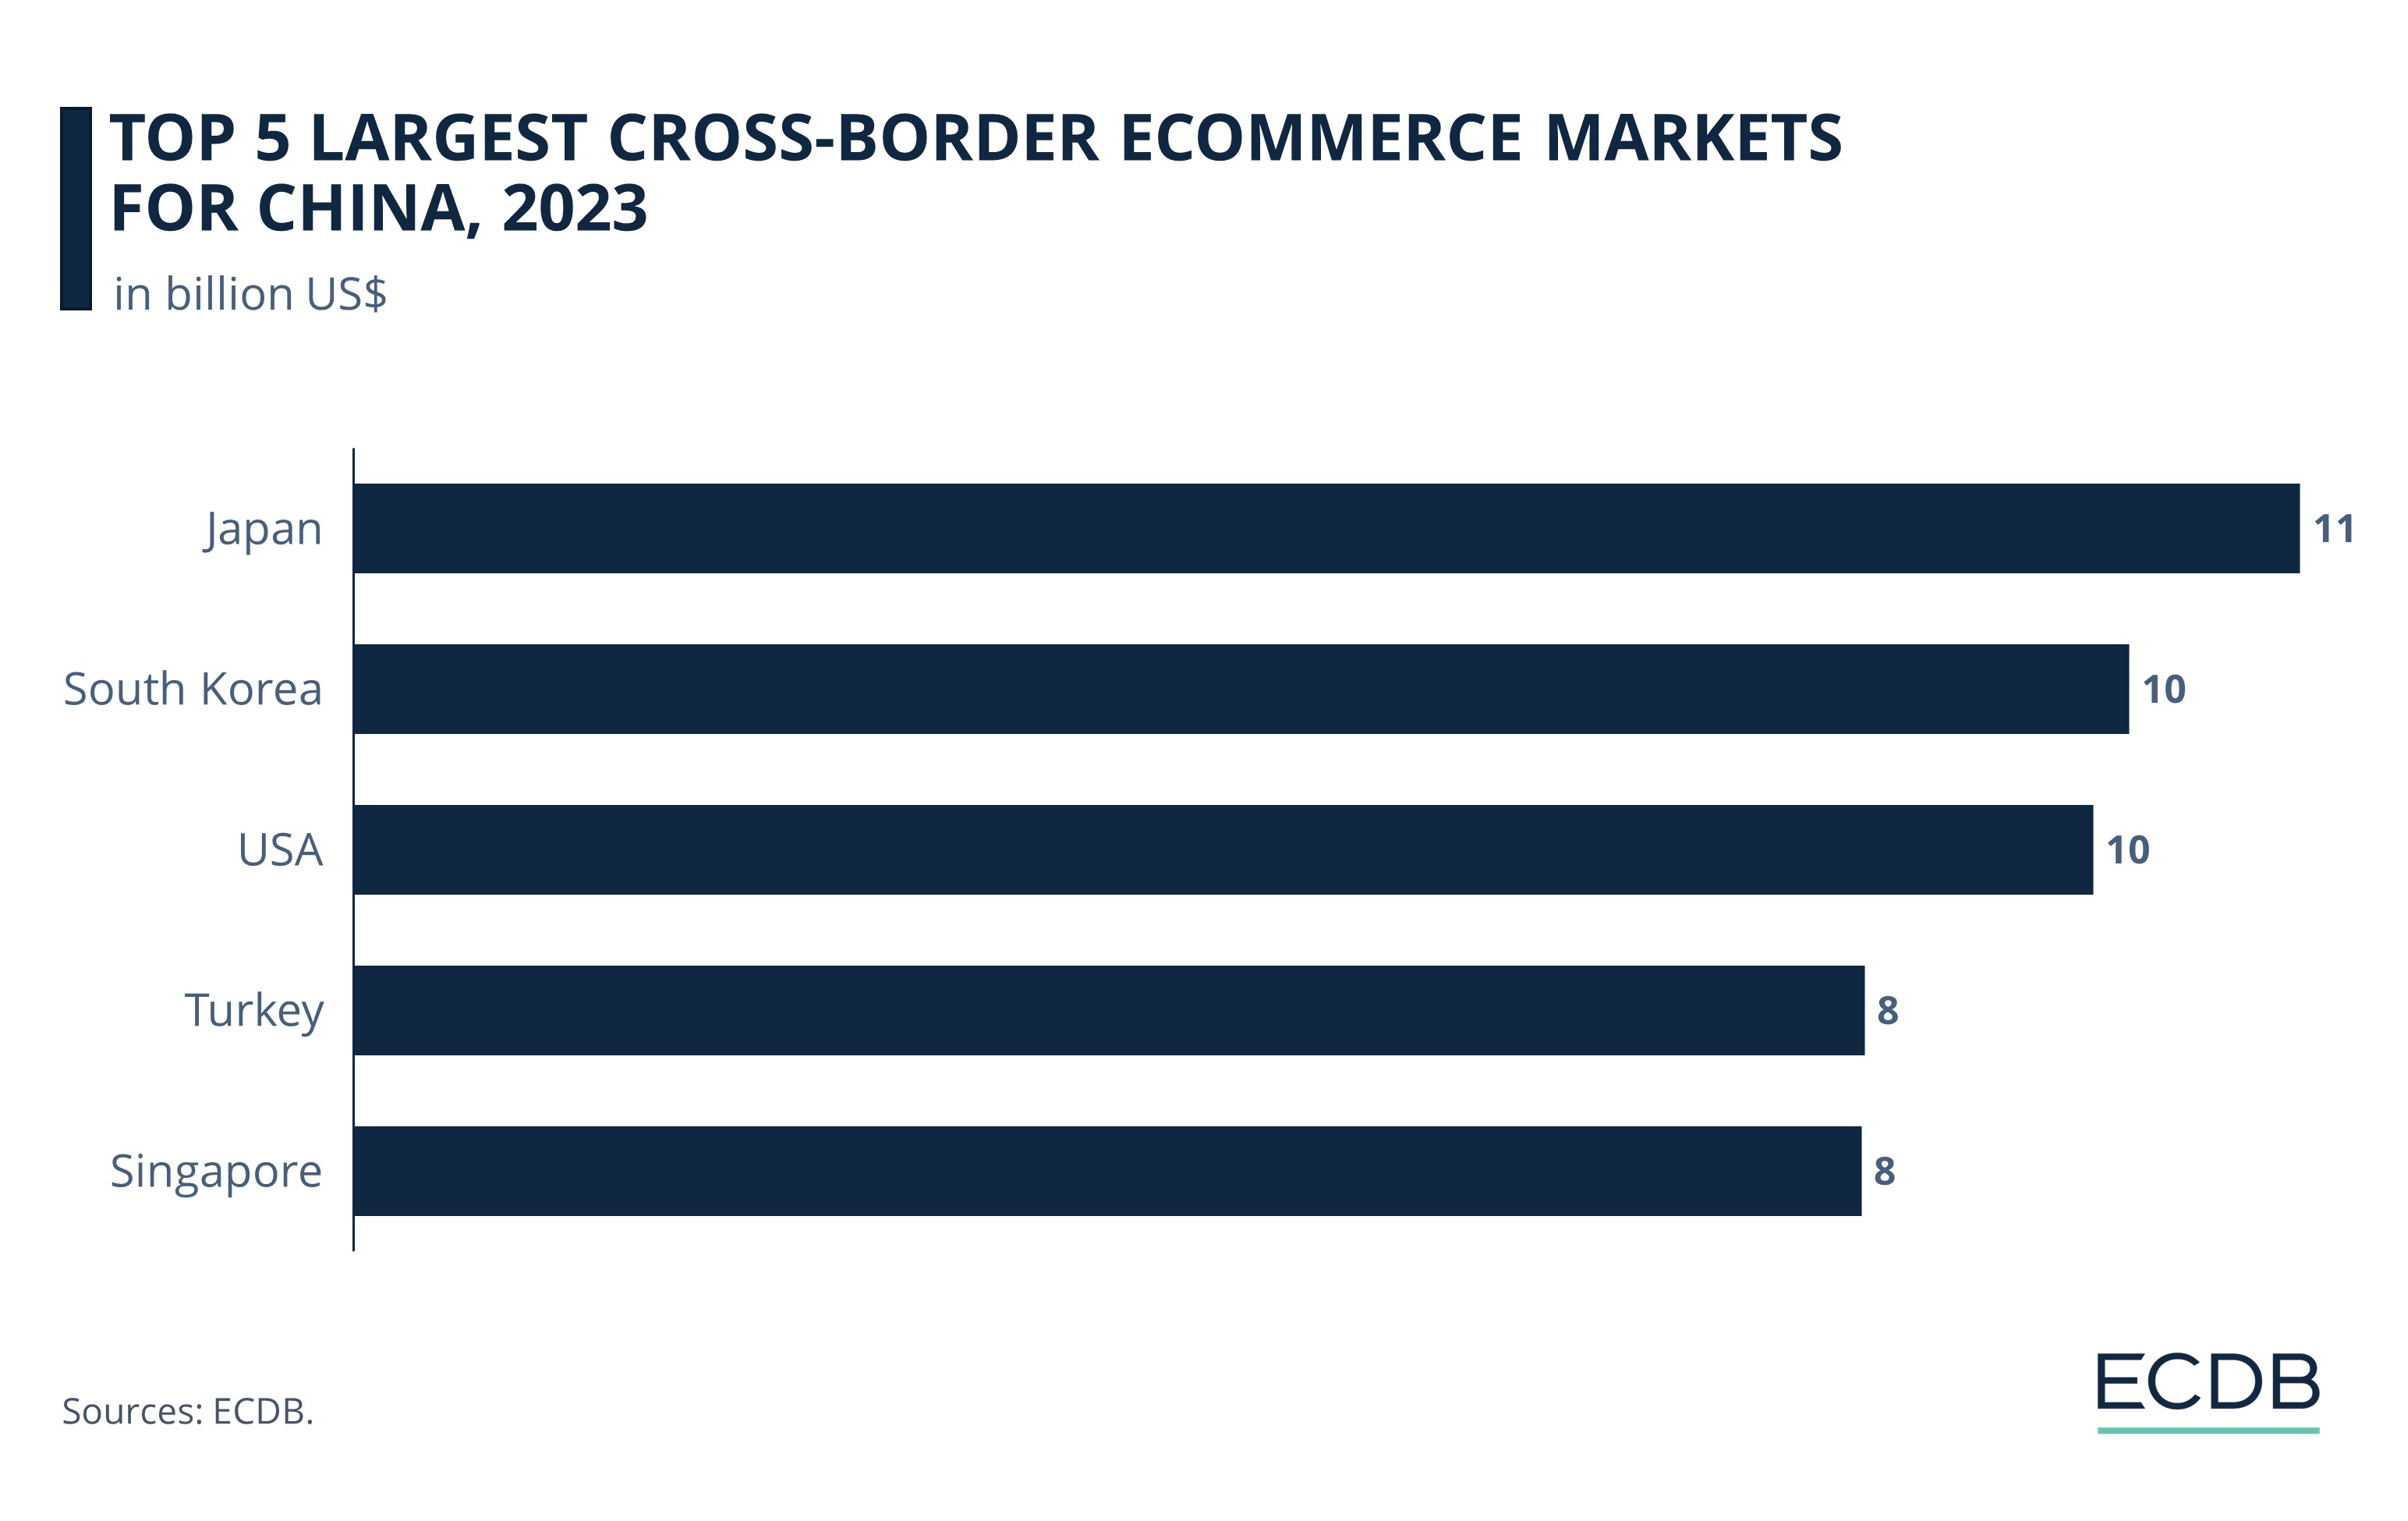 Top 5 Largest Cross-Border eCommerce Markets for China, 2023